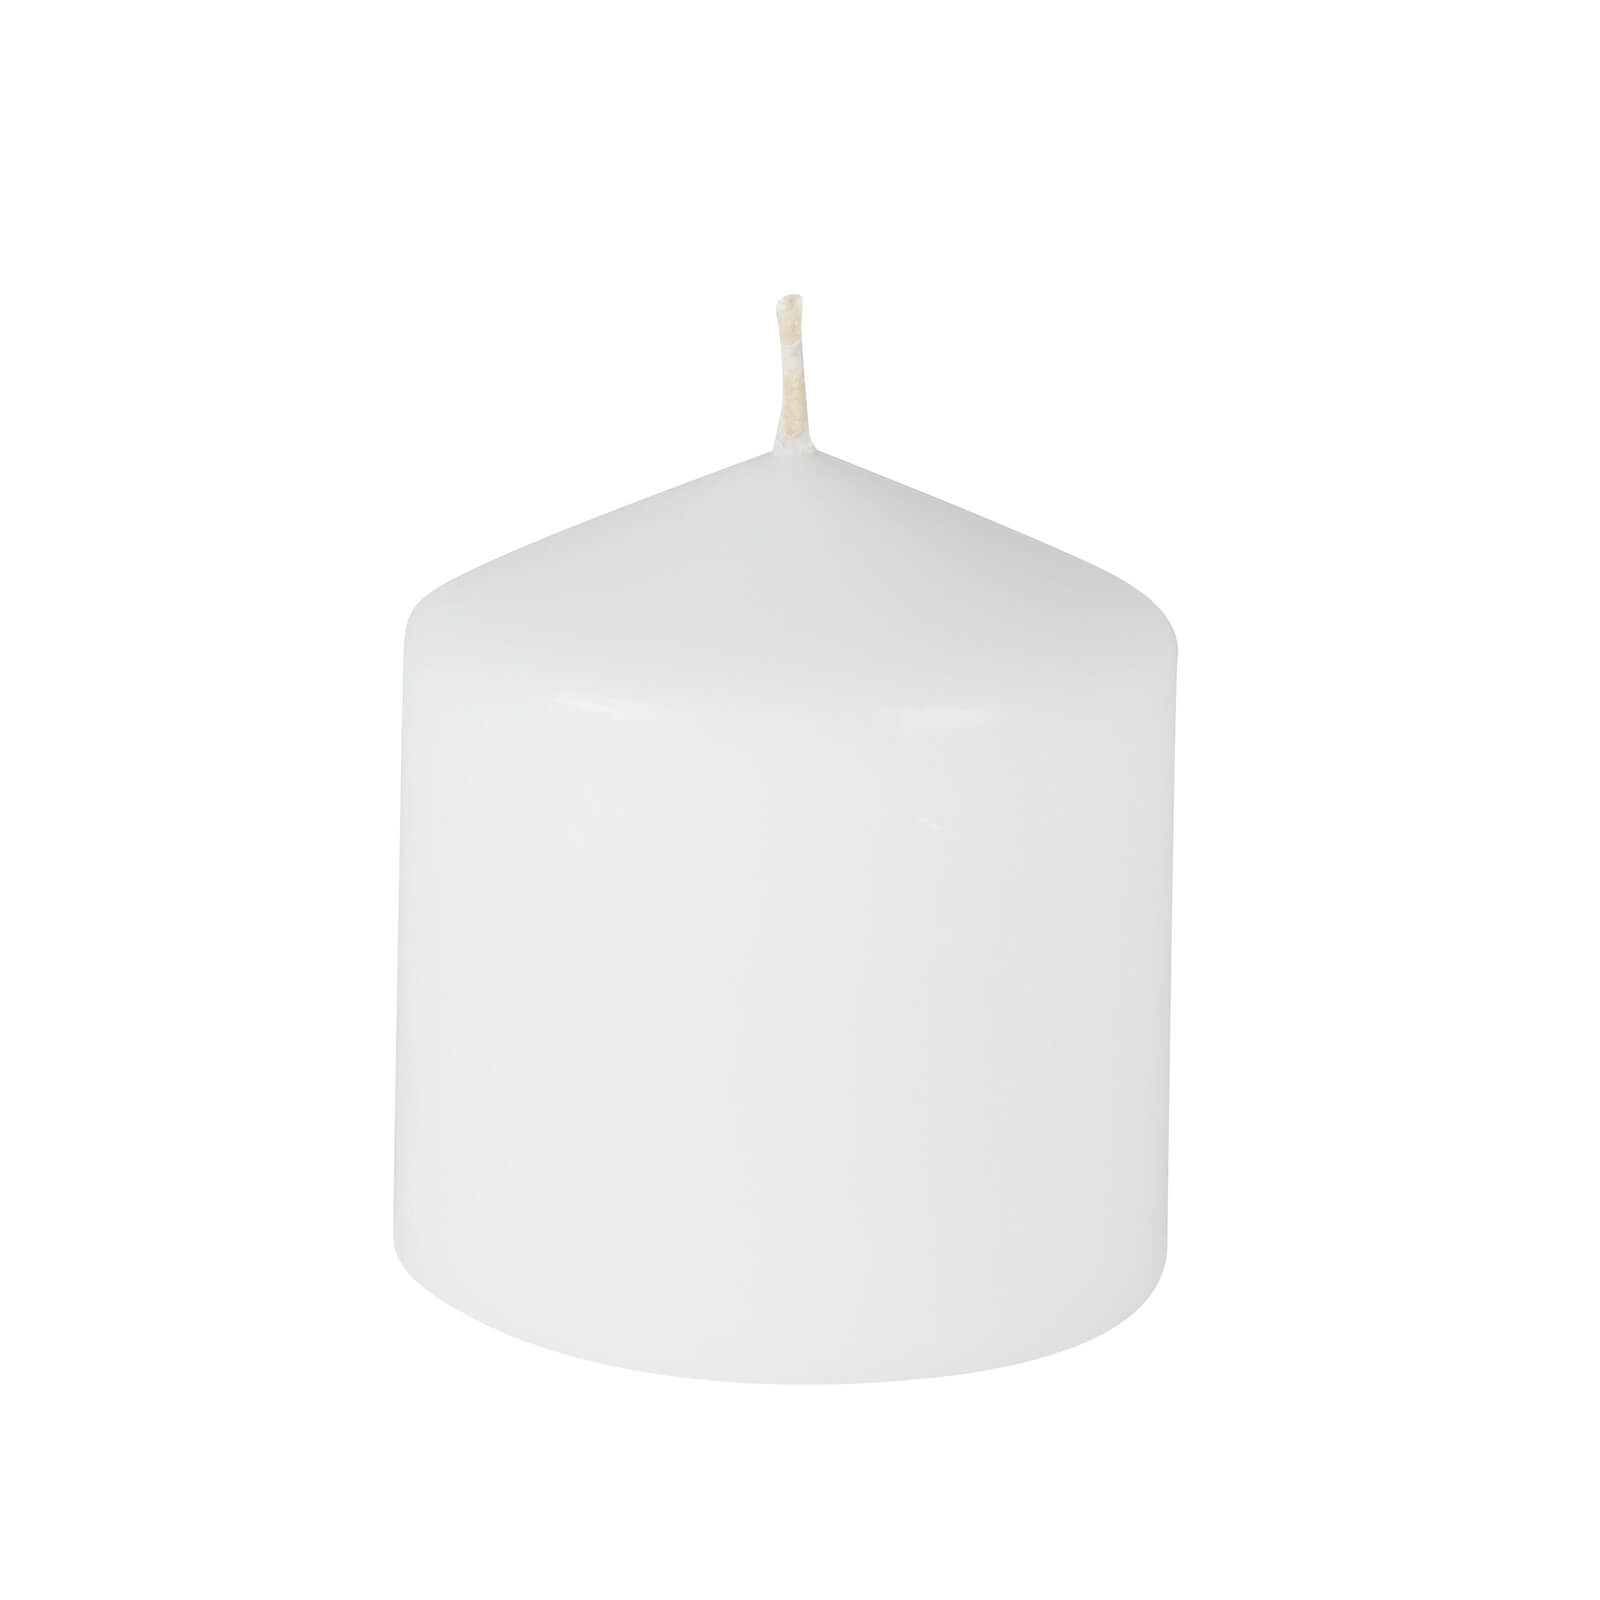 Photo of Small Pillar Candle - White